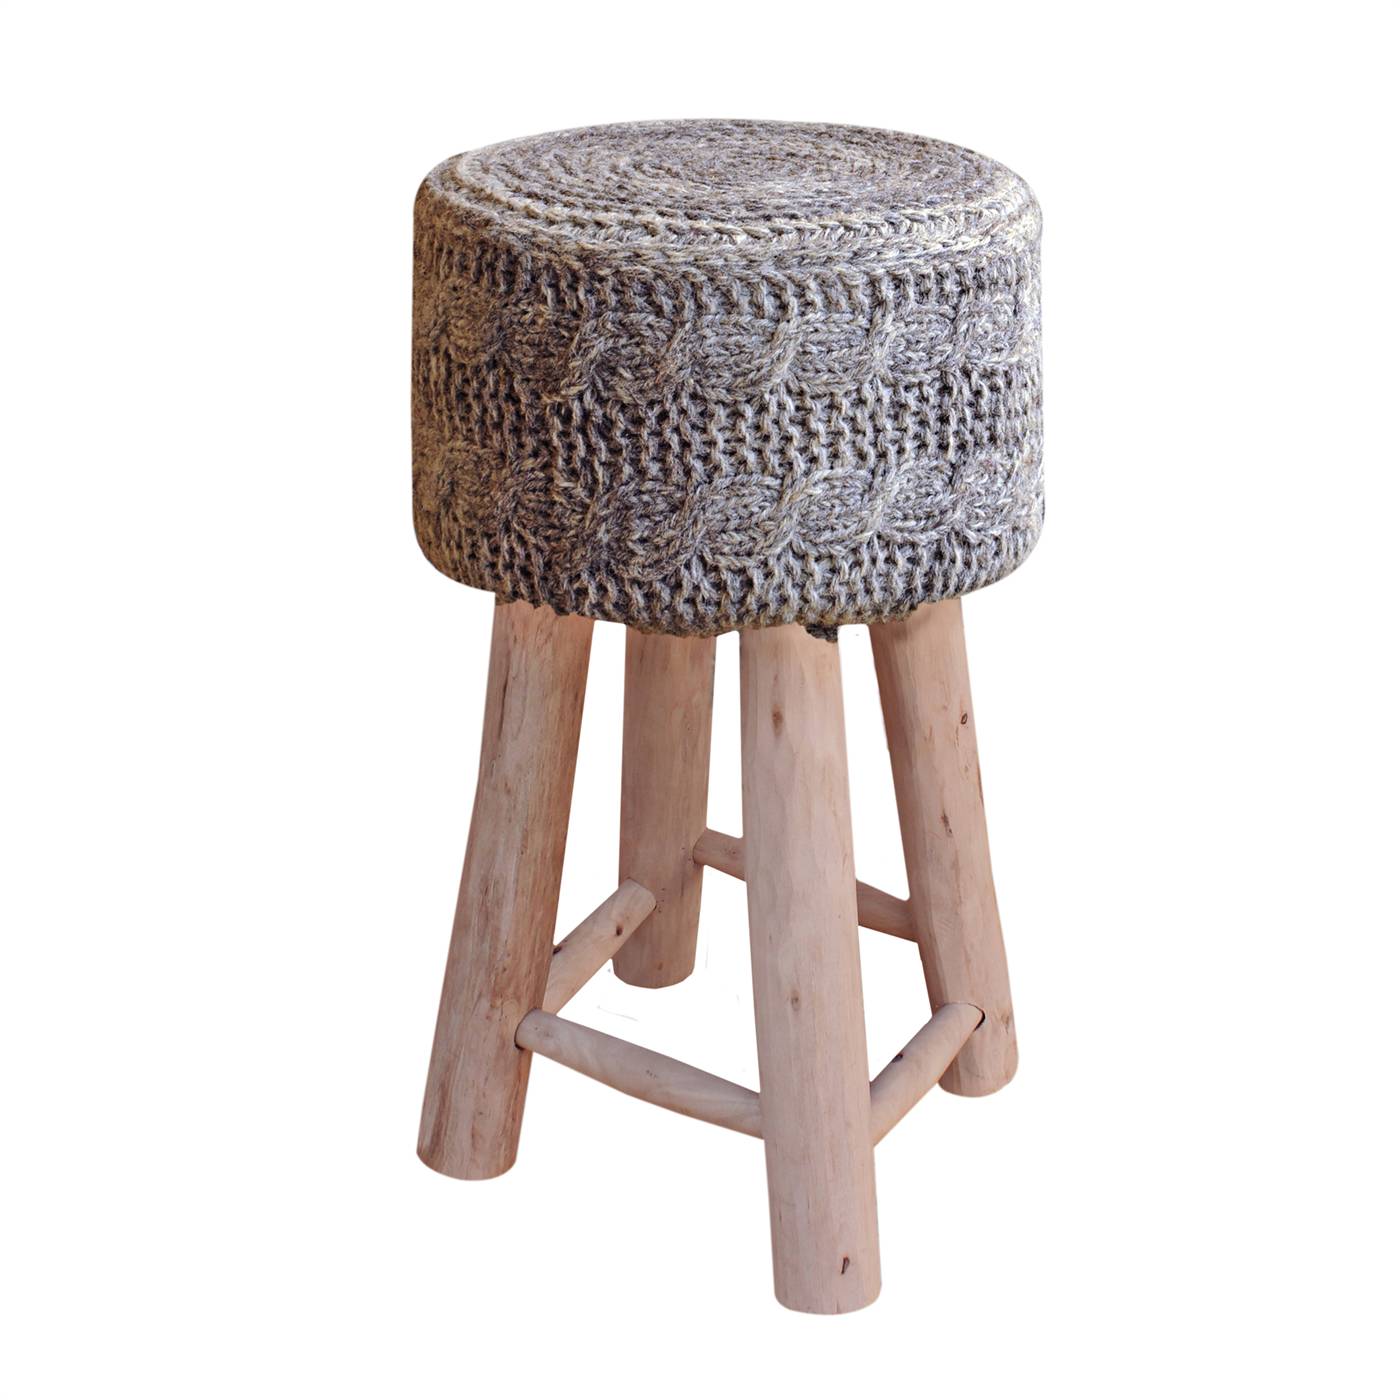 Pluto Bar Stool, 40x40x70 cm, Grey, Wool, Hand Knitted, Hm Knitted, Flat Weave